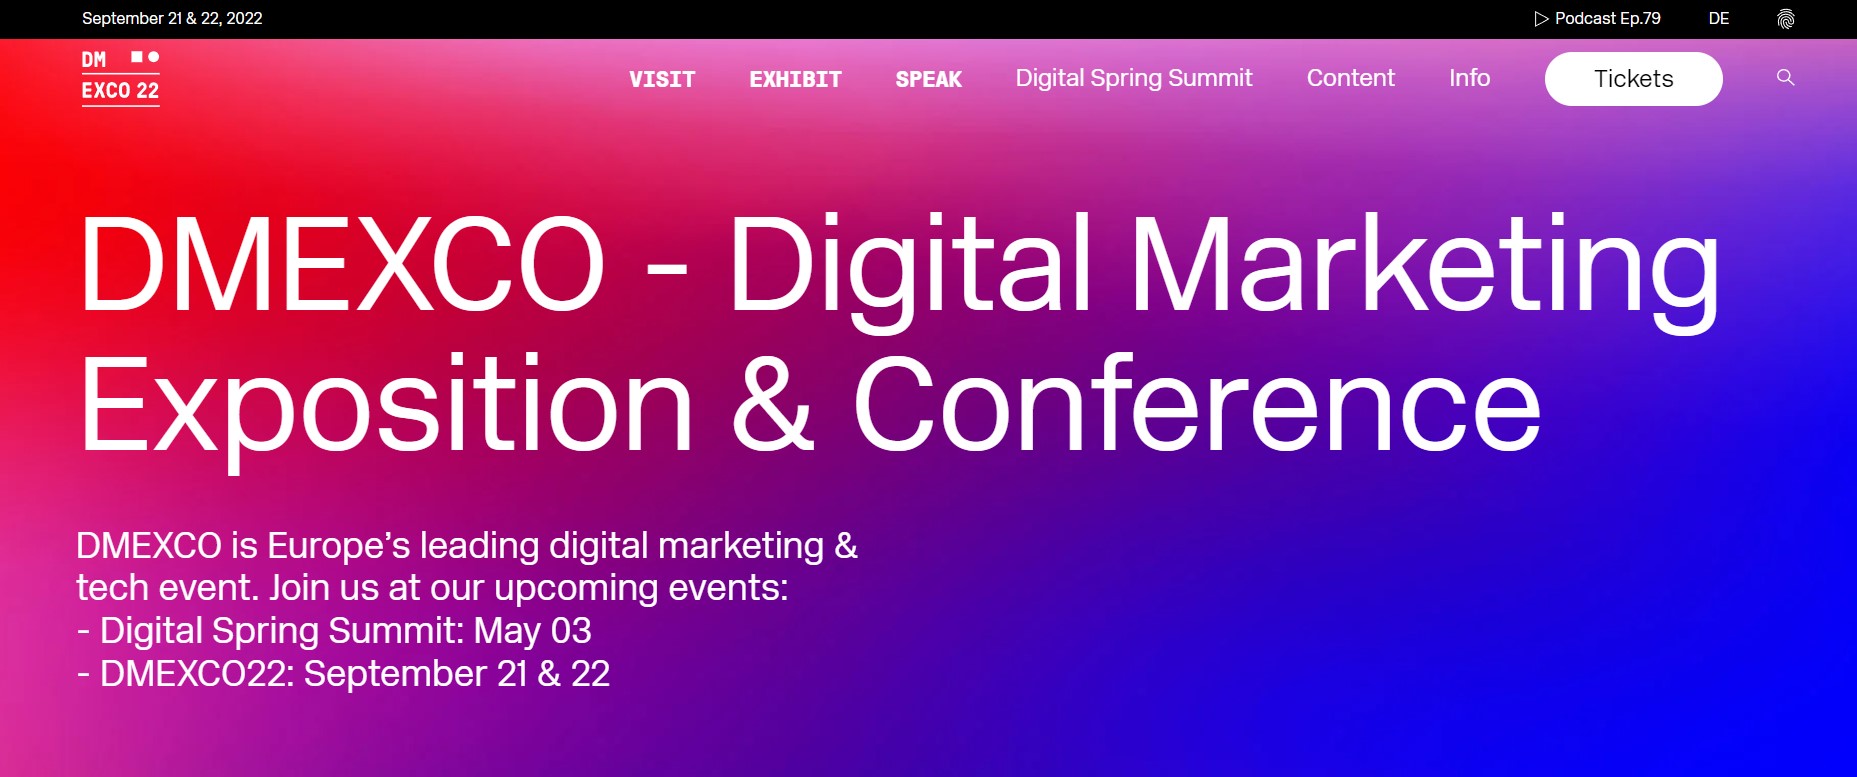 Digital Marketing Exposition and Conference (DMEXCO22)